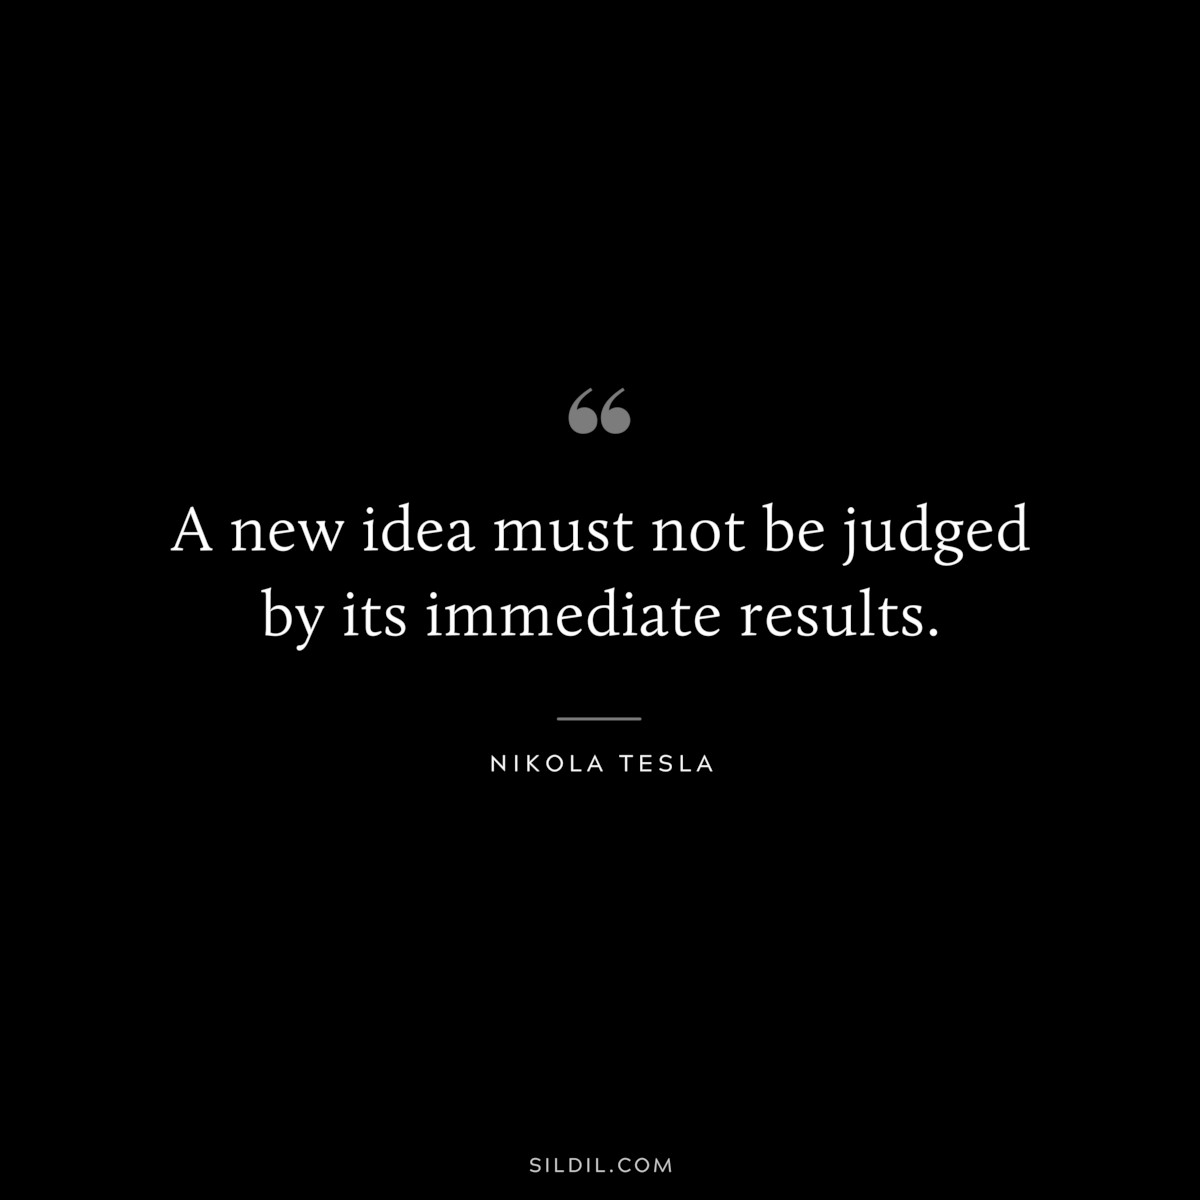 A new idea must not be judged by its immediate results. ― Nikola Tesla